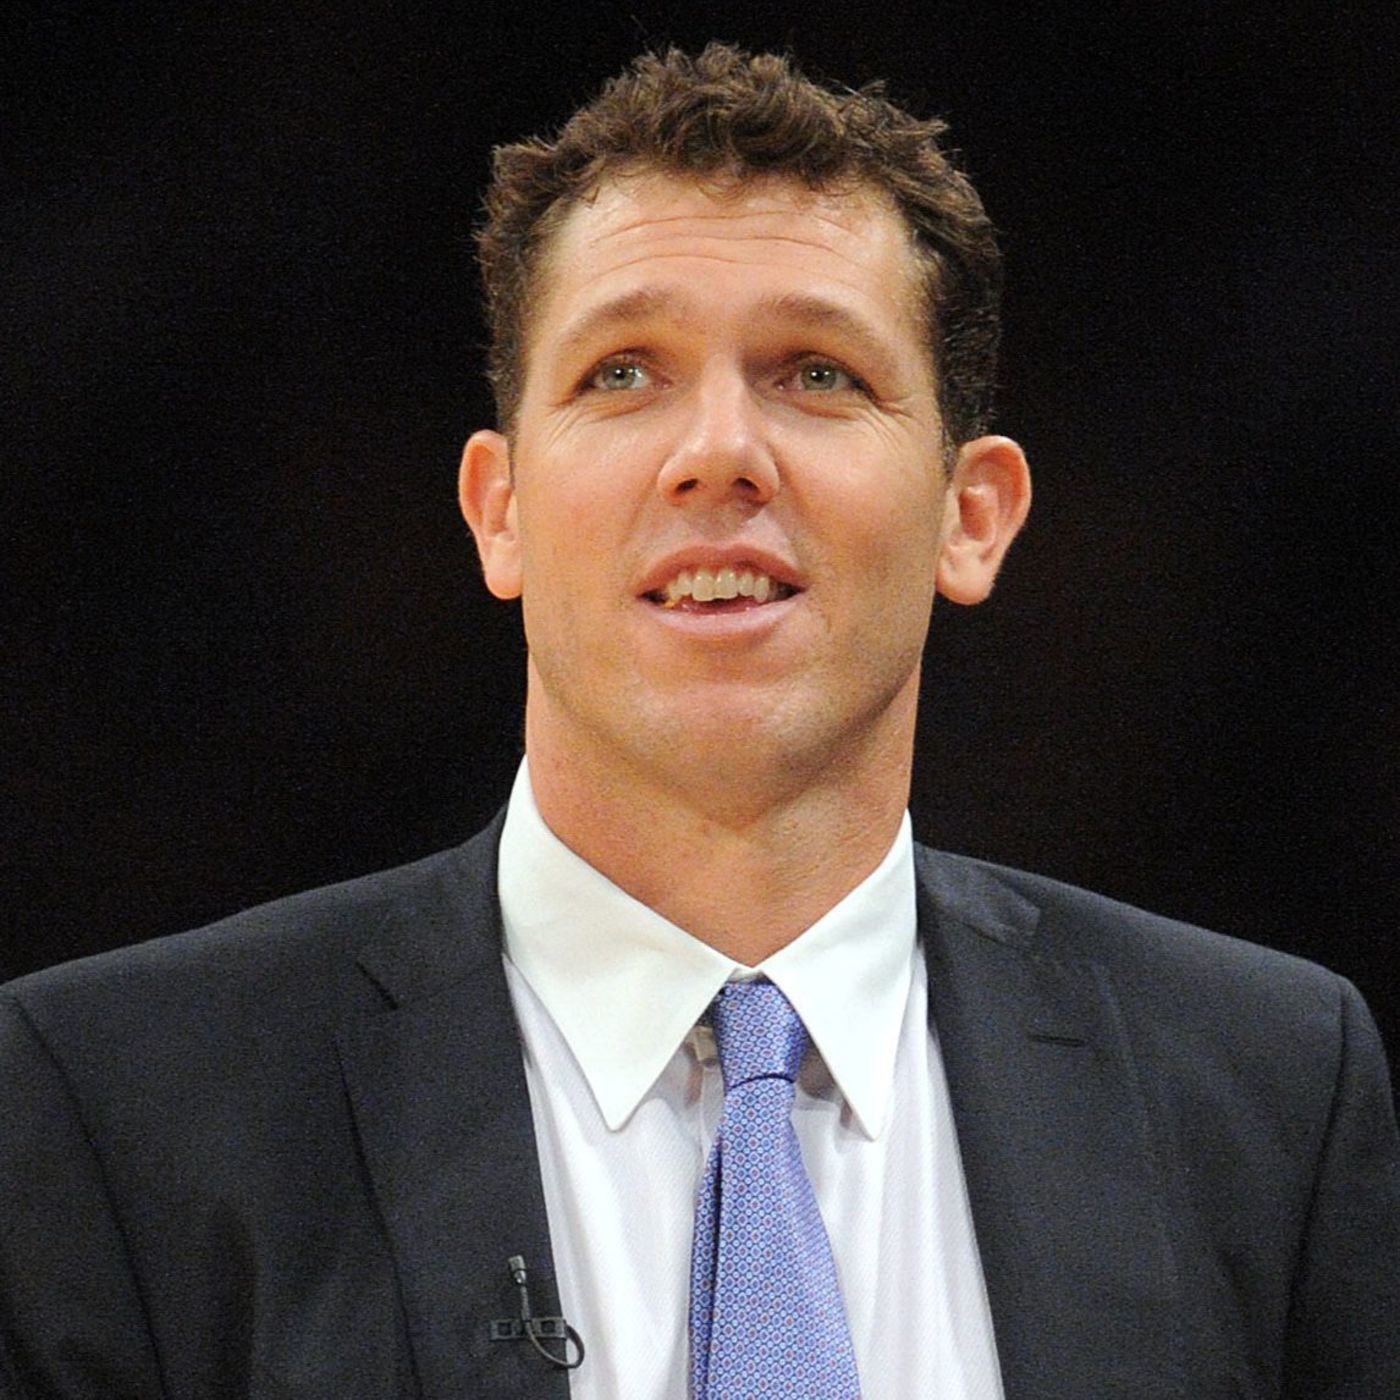 Luke Walton joins to talk about the exciting young Lakers